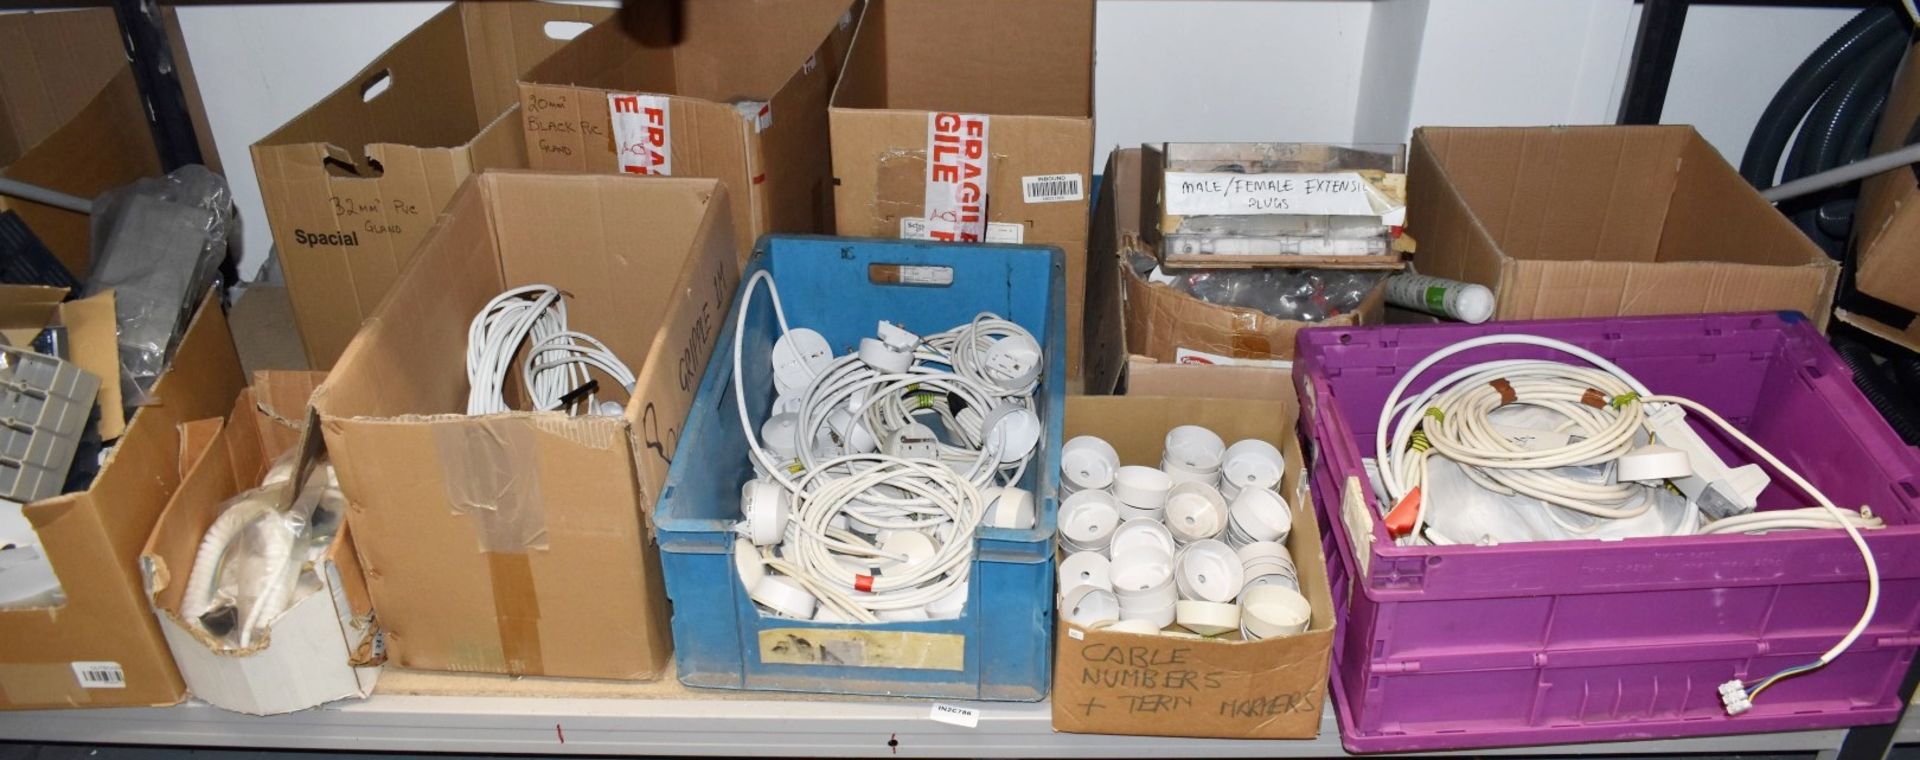 1 x Assorted Job Lot - Cable Glands, Light Suspension Kits, Saddles, Ceiling Roses, Cables, Sockets